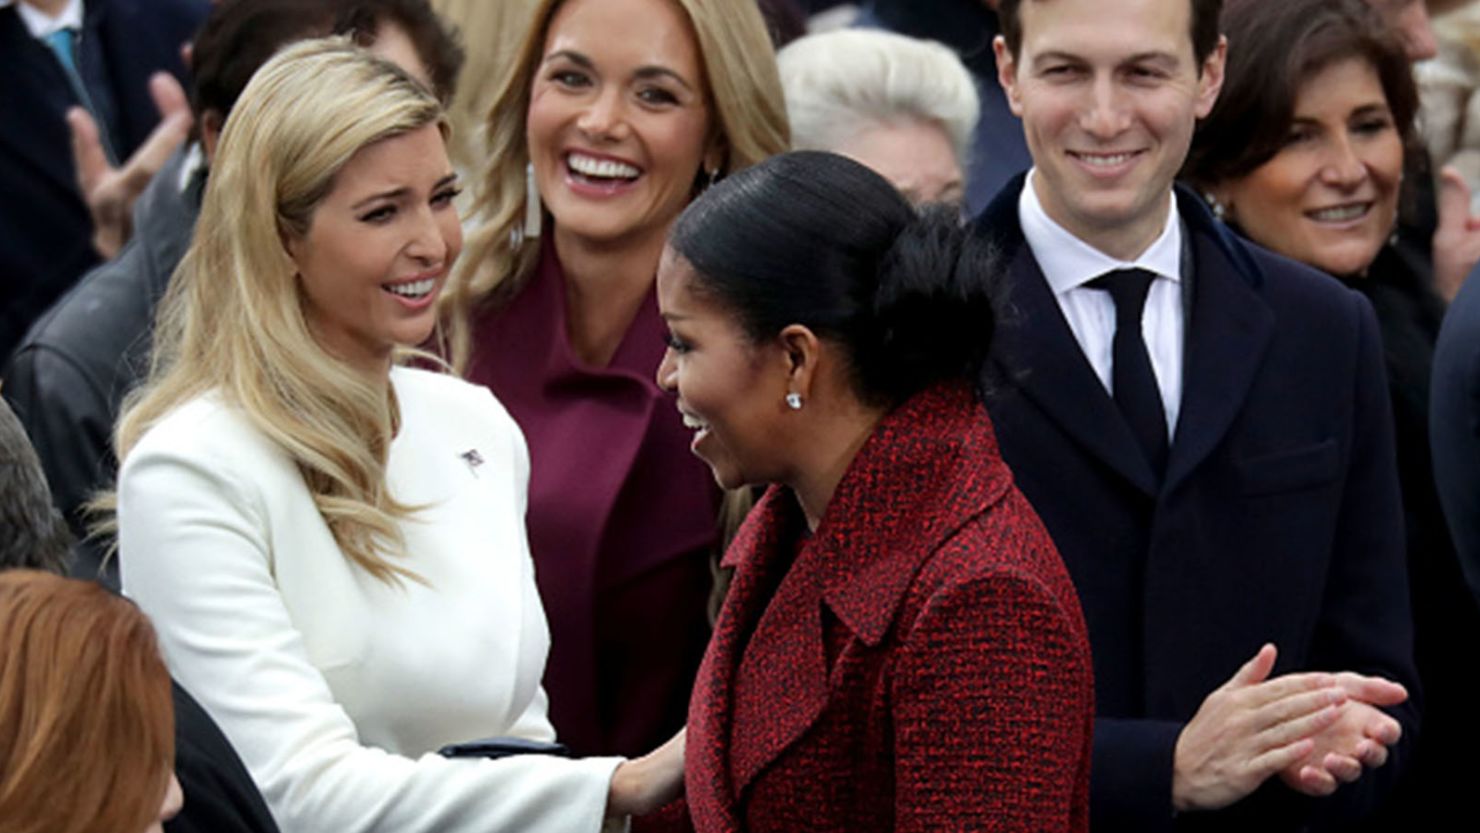 WASHINGTON, DC - JANUARY 20: First lady Michelle Obama (C) greets (L-R) Ivanka Trump, Vanessa Trump and Jared Kushner as she arrives for the inauguration of U.S. President-elect Donald Trump on the West Front of the U.S. Capitol on January 20, 2017 in Washington, DC. In today's inauguration ceremony Donald J. Trump becomes the 45th president of the United States. 